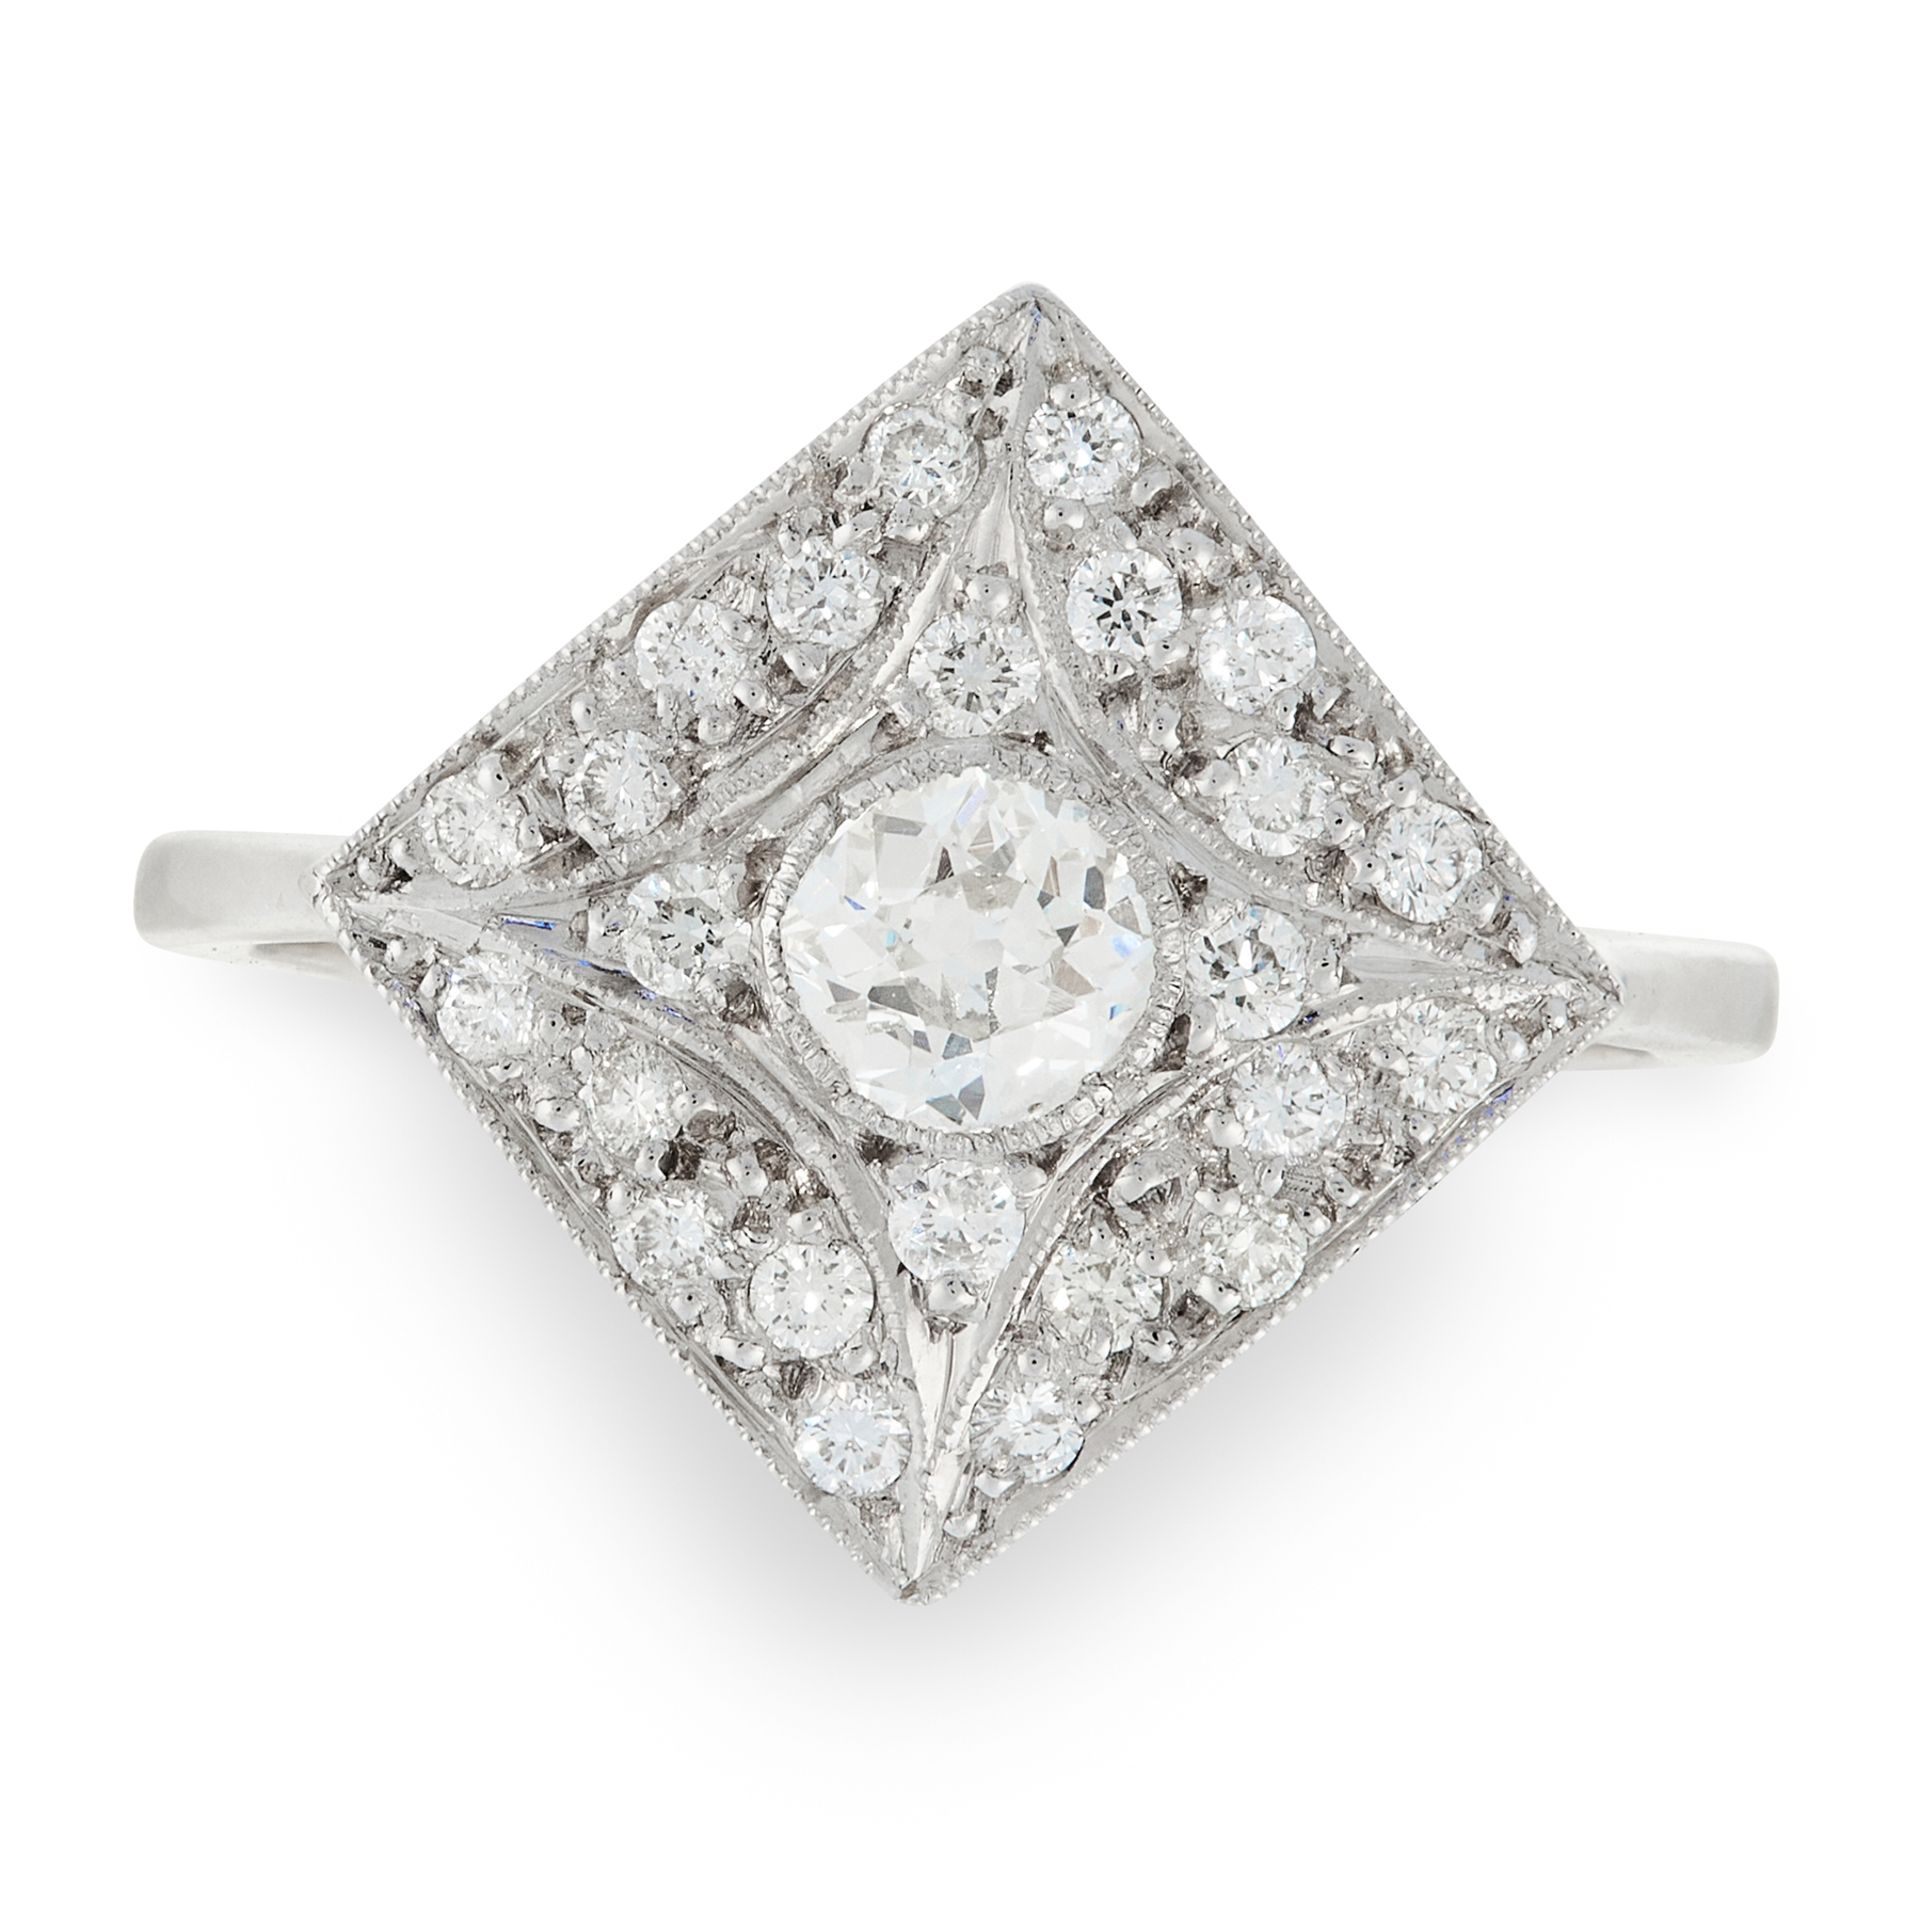 A DIAMOND DRESS RING in 18ct white gold, in Art Deco design, the square face is set with old and